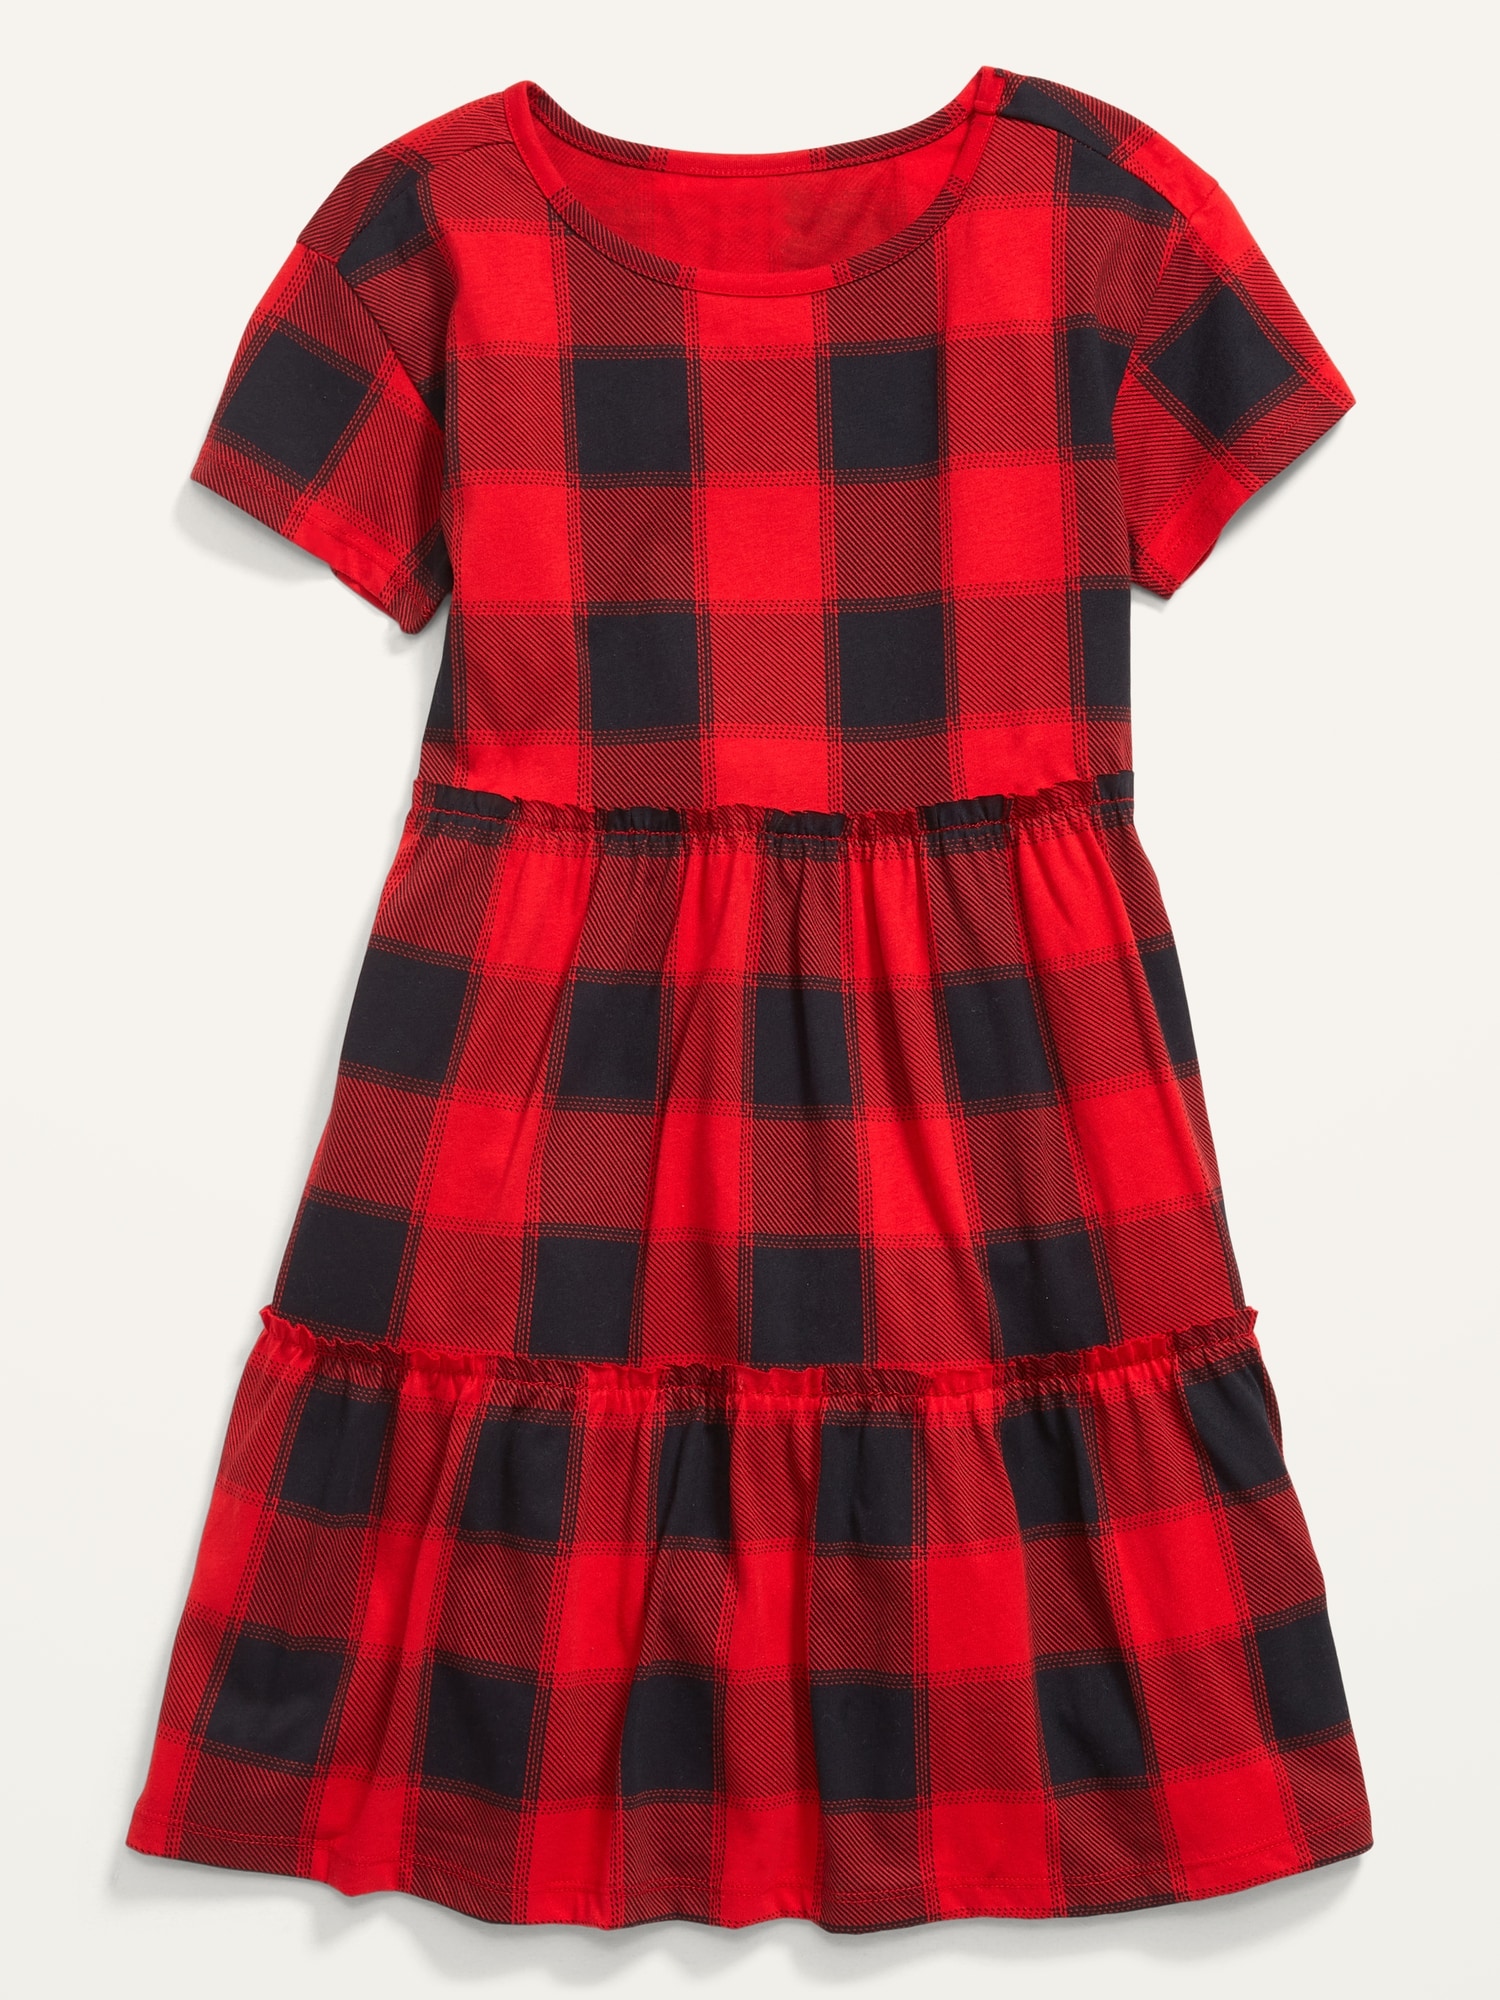 Tiered Printed Short Sleeve Dress For Girls Old Navy 